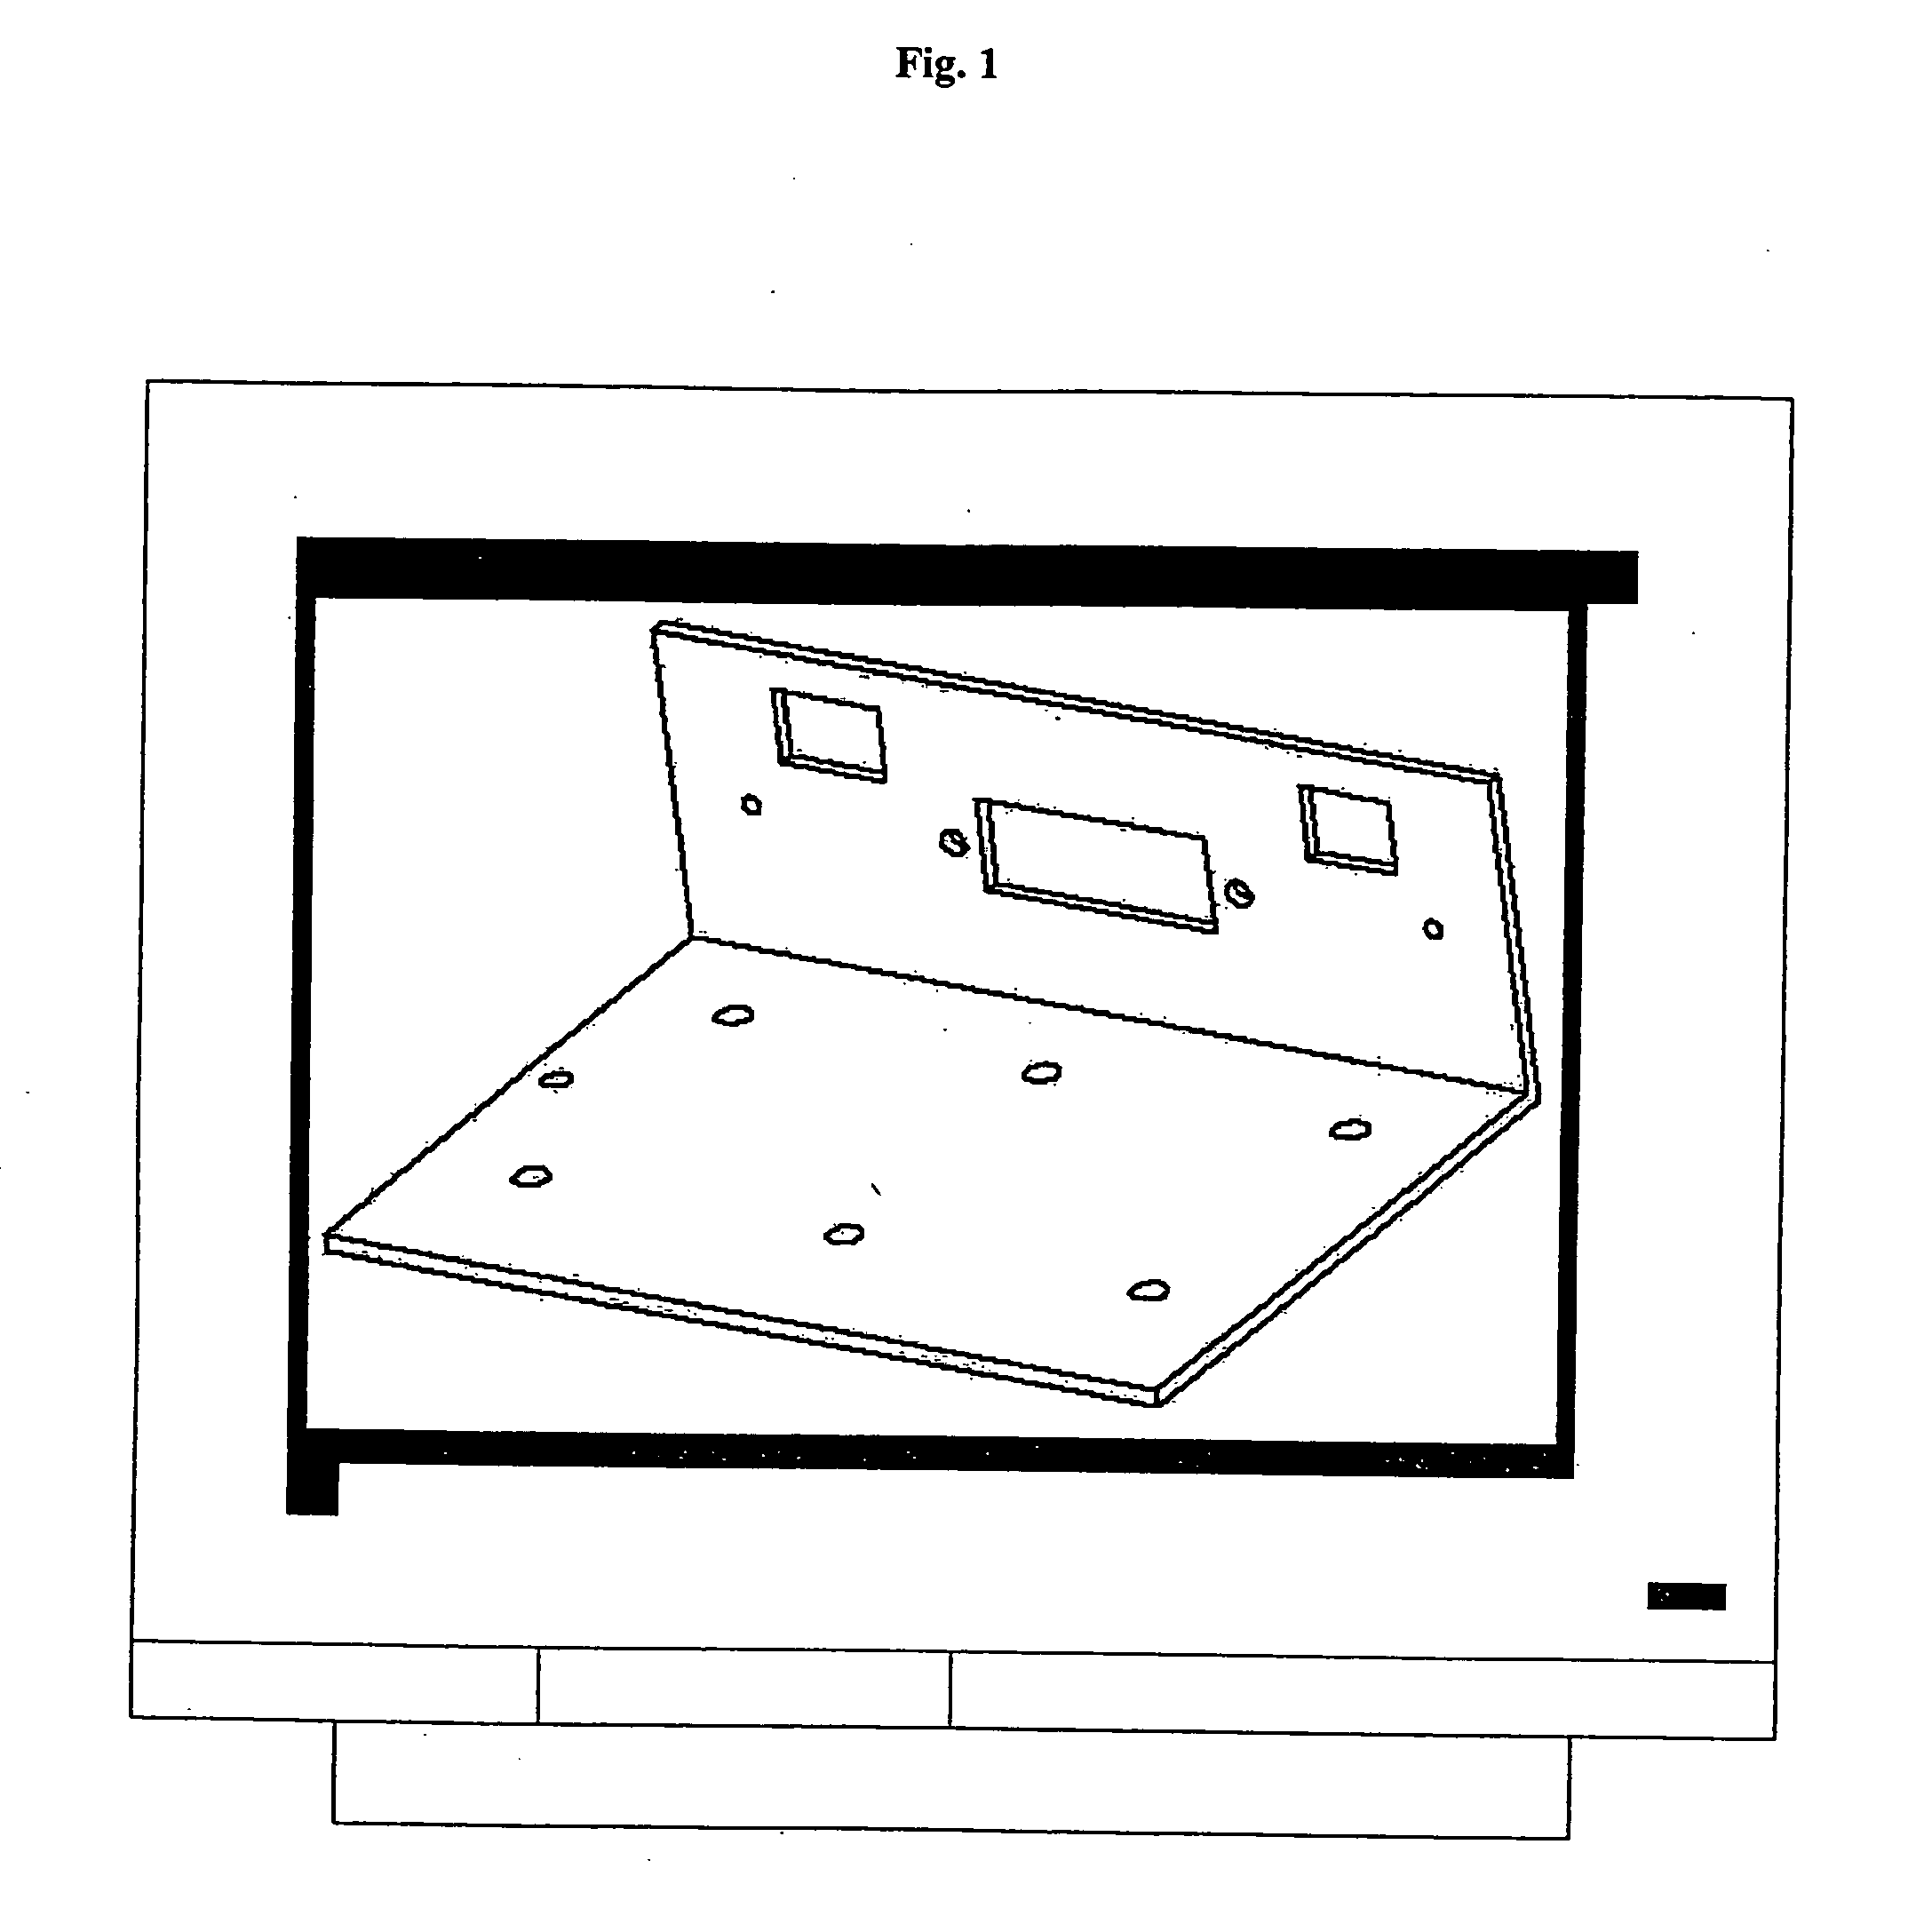 Methods, systems and computer program products for altering video images to aid an operator of a fastener insertion machine